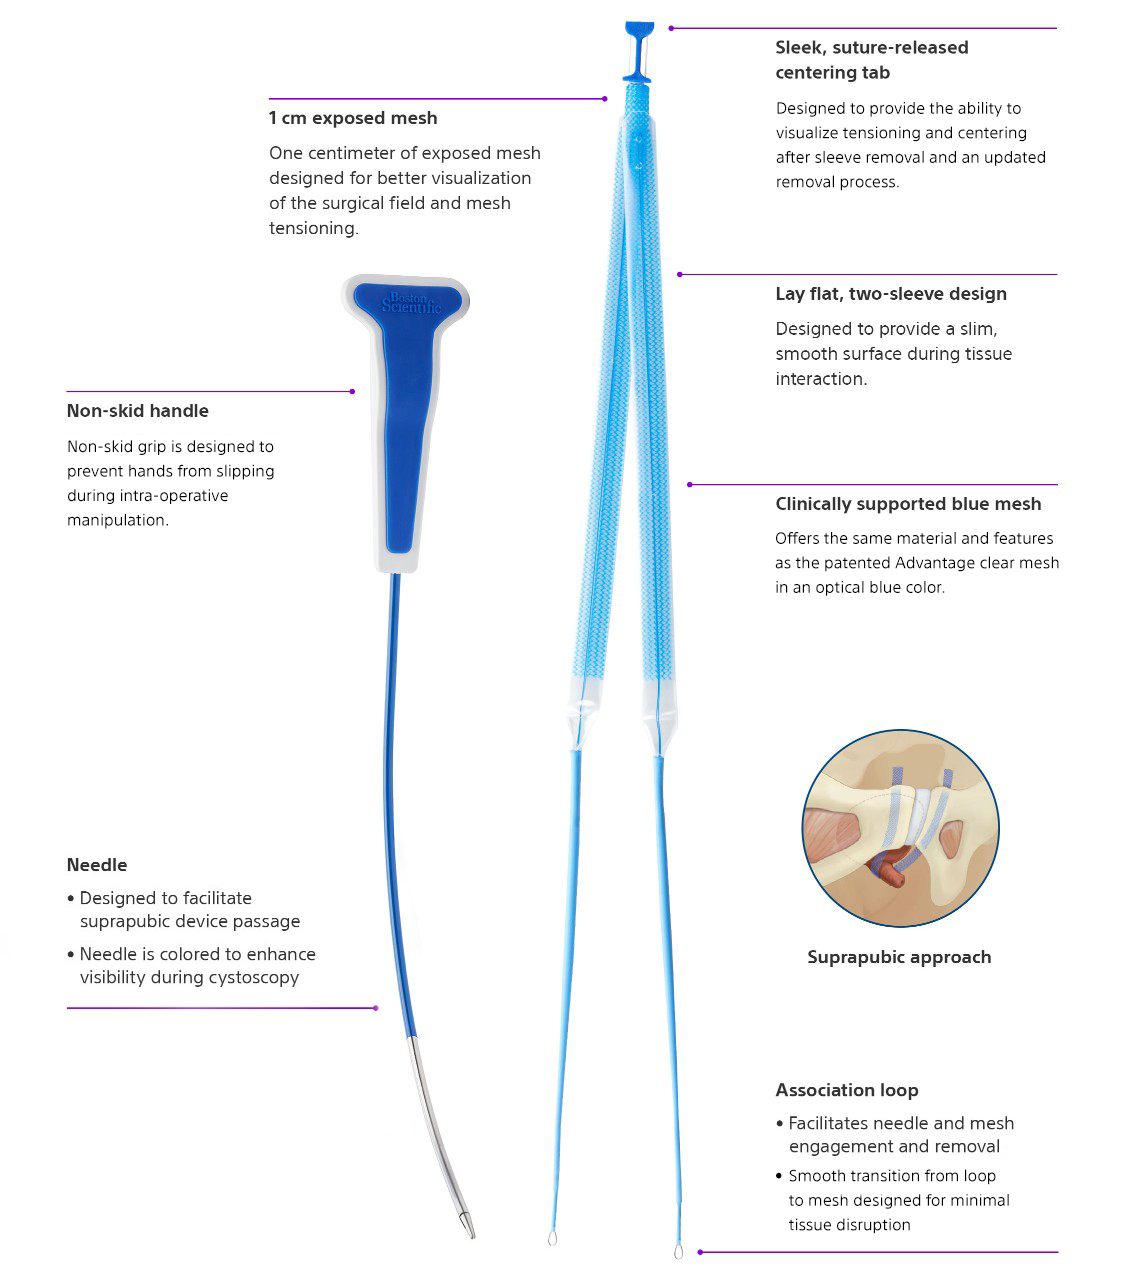 Trocar features: non-skid handle grip handle, and needle is designed to facilitate suprapubic device passage. Mesh features: sleek and suture-released centering tab, 1cm exposed mesh, 2 sleeve lay flat design, clincially supported blue mesh and smooth transition from loop to mesh allows for minimal tissue disruption. 